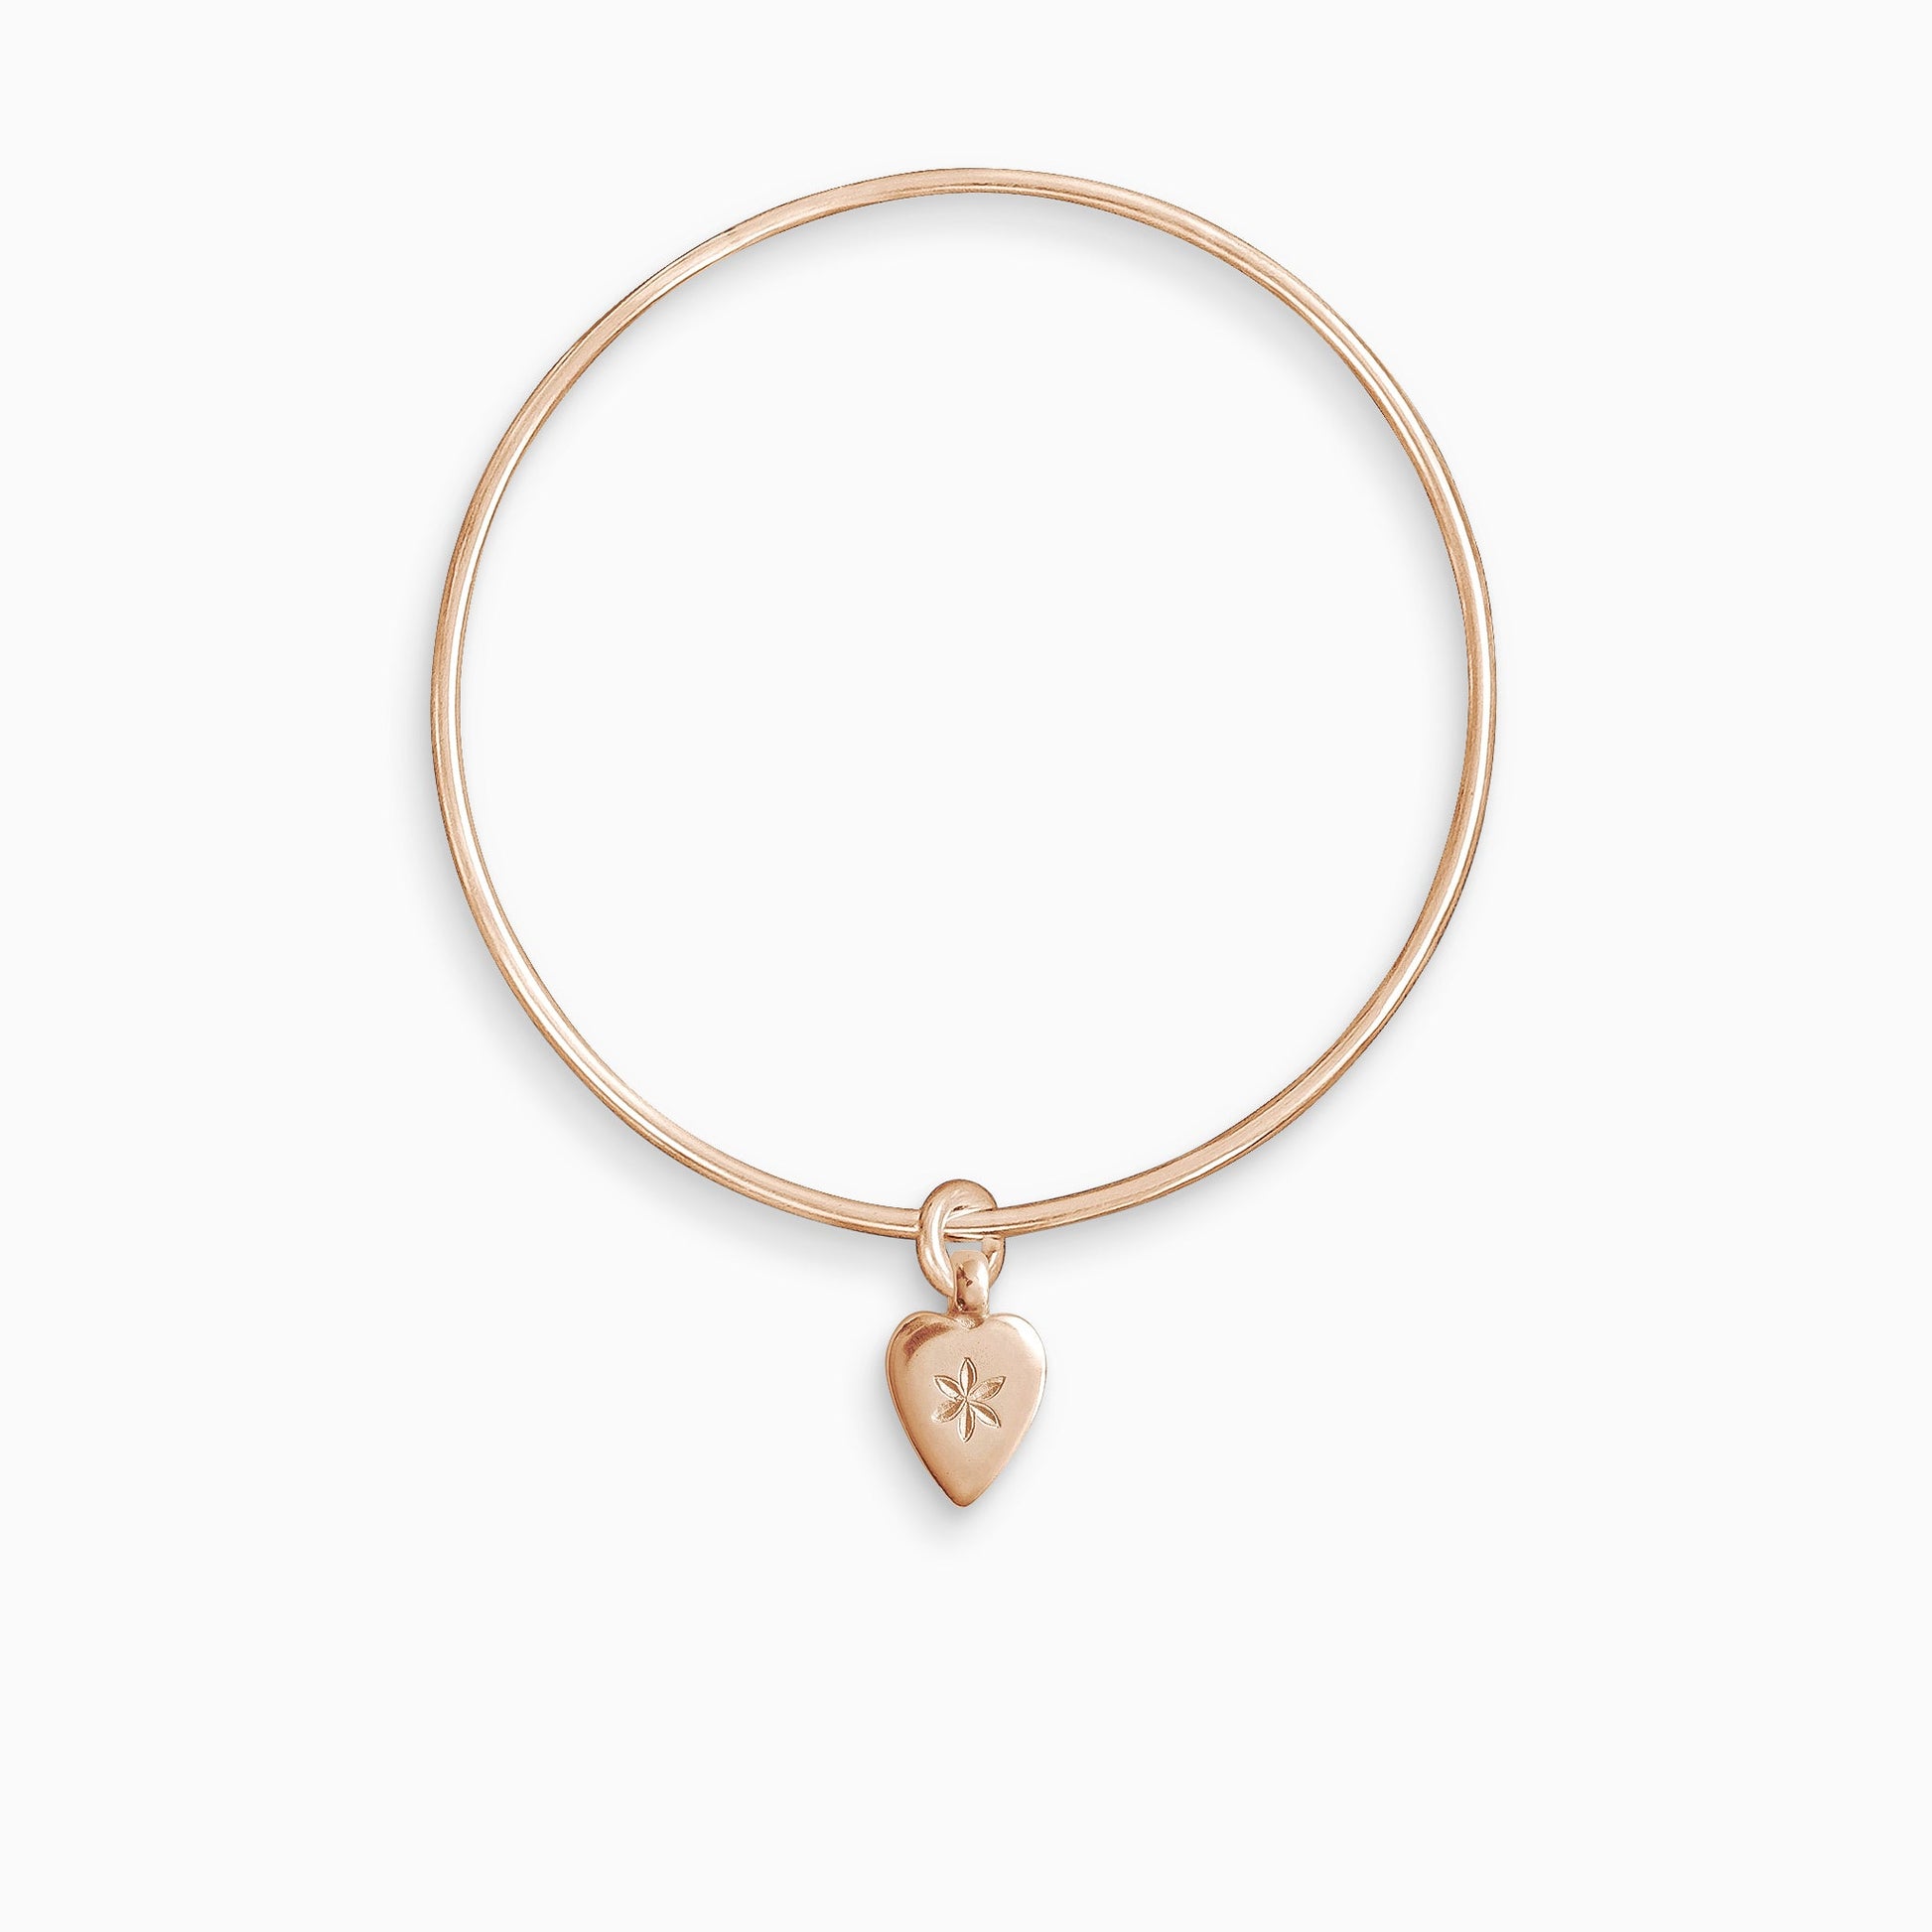 An 18ct Fairtrade rose gold smooth heart shaped charm engraved with a 6 petal flower, freely moving on a round wire bangle. Charm 15mm x 8mm. Bangle 63mm inside diameter x 2mm round wire.